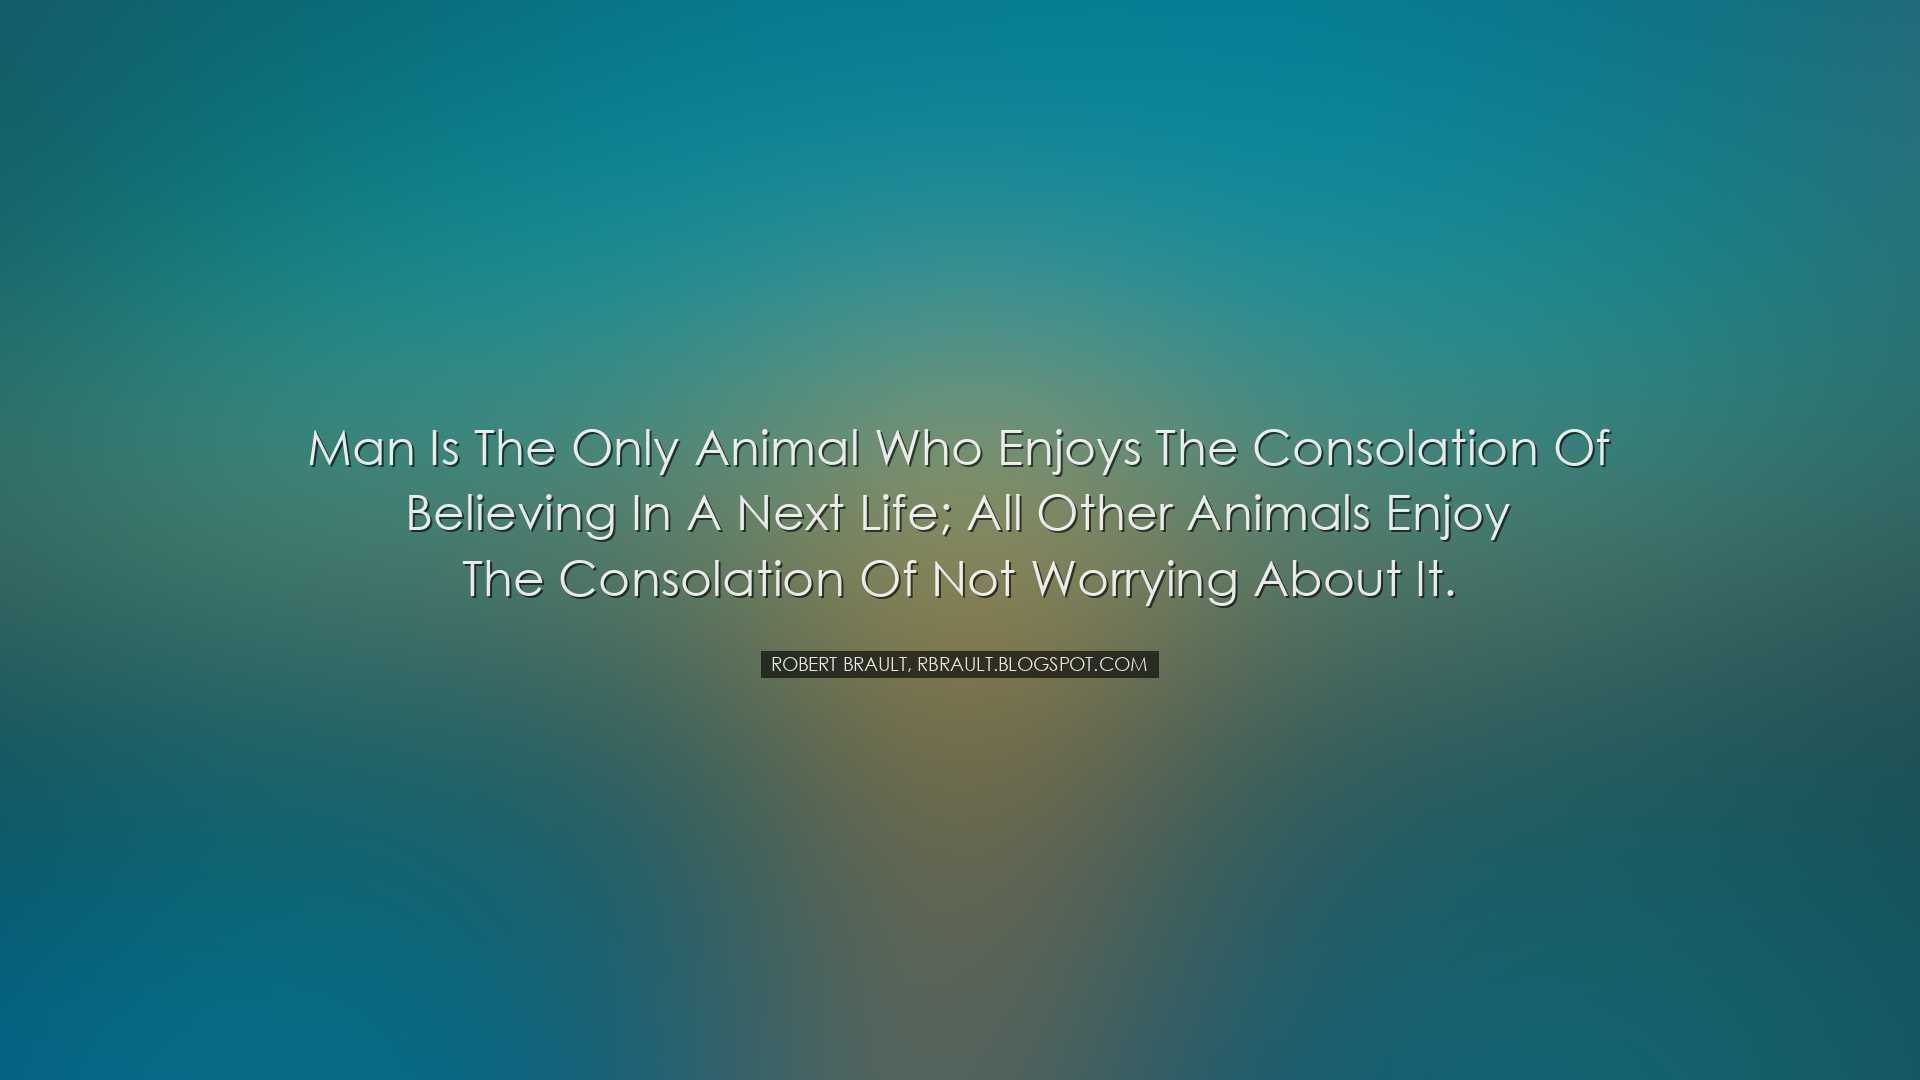 Man is the only animal who enjoys the consolation of believing in